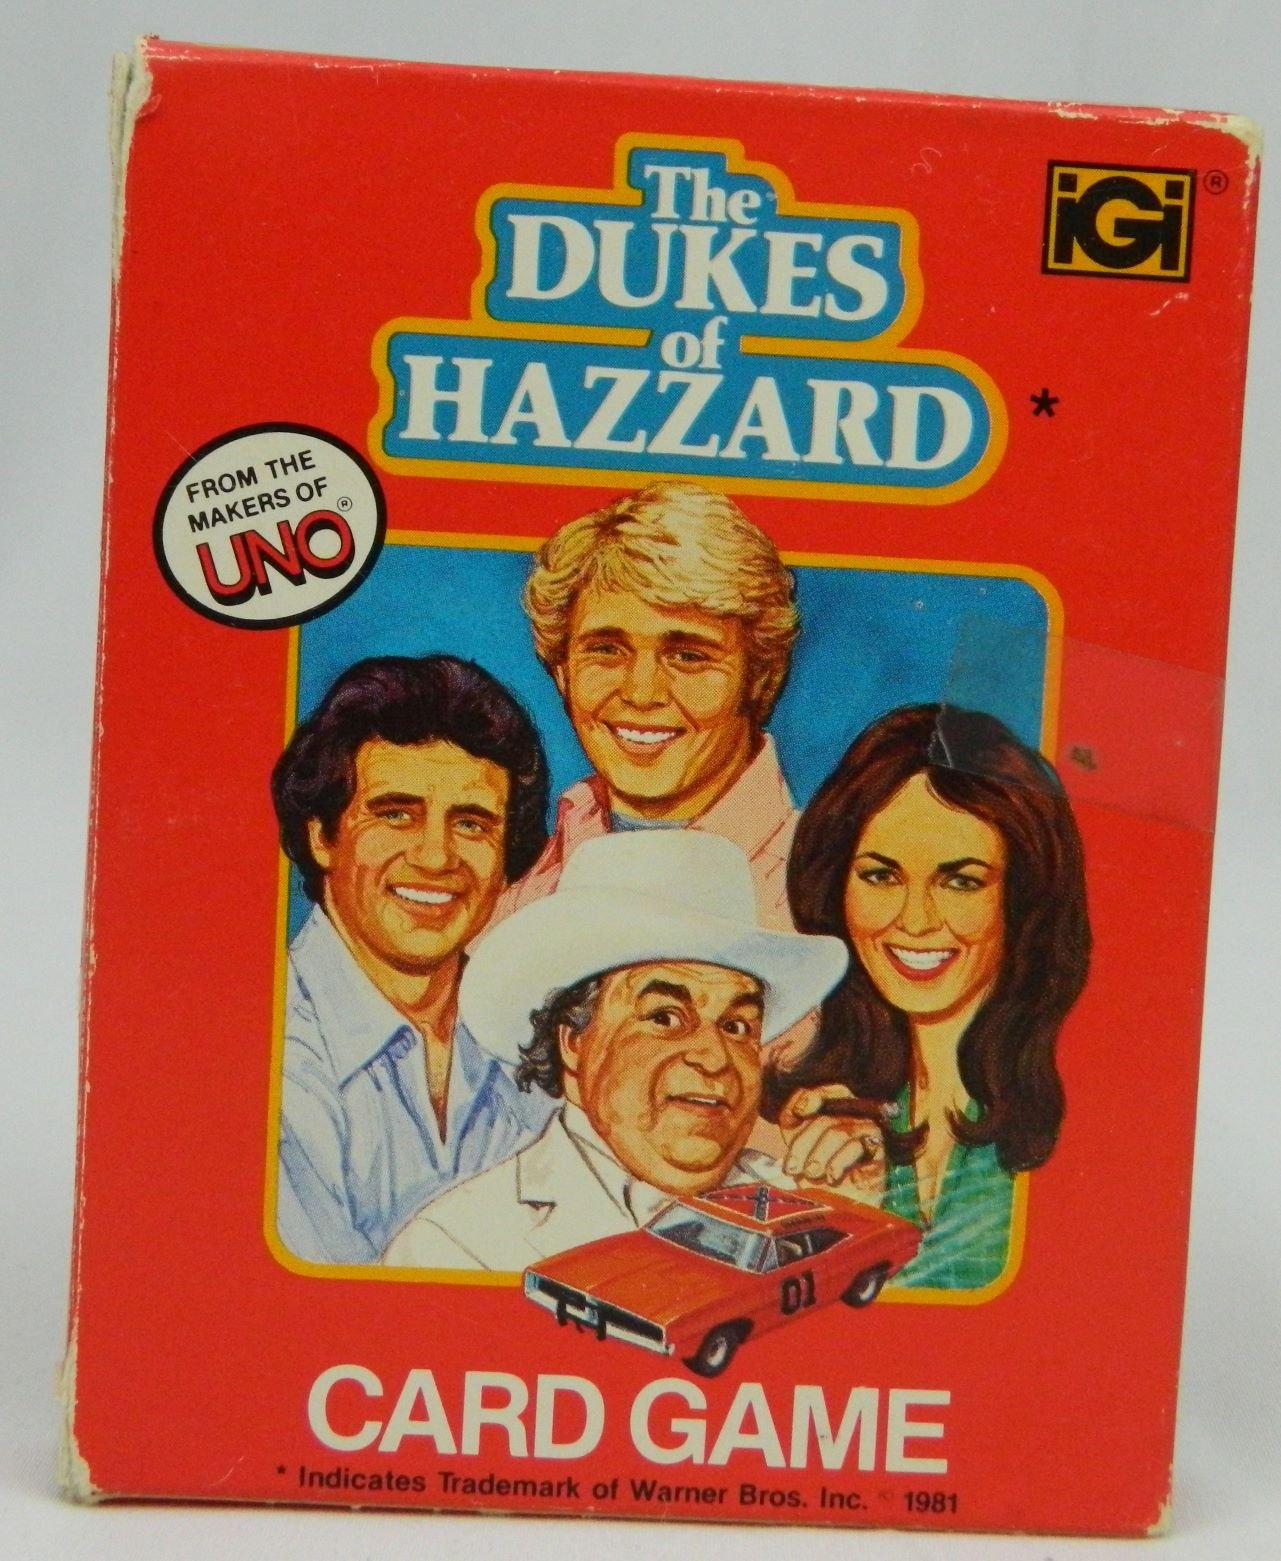 Box for Dukes of Hazzard Card Game